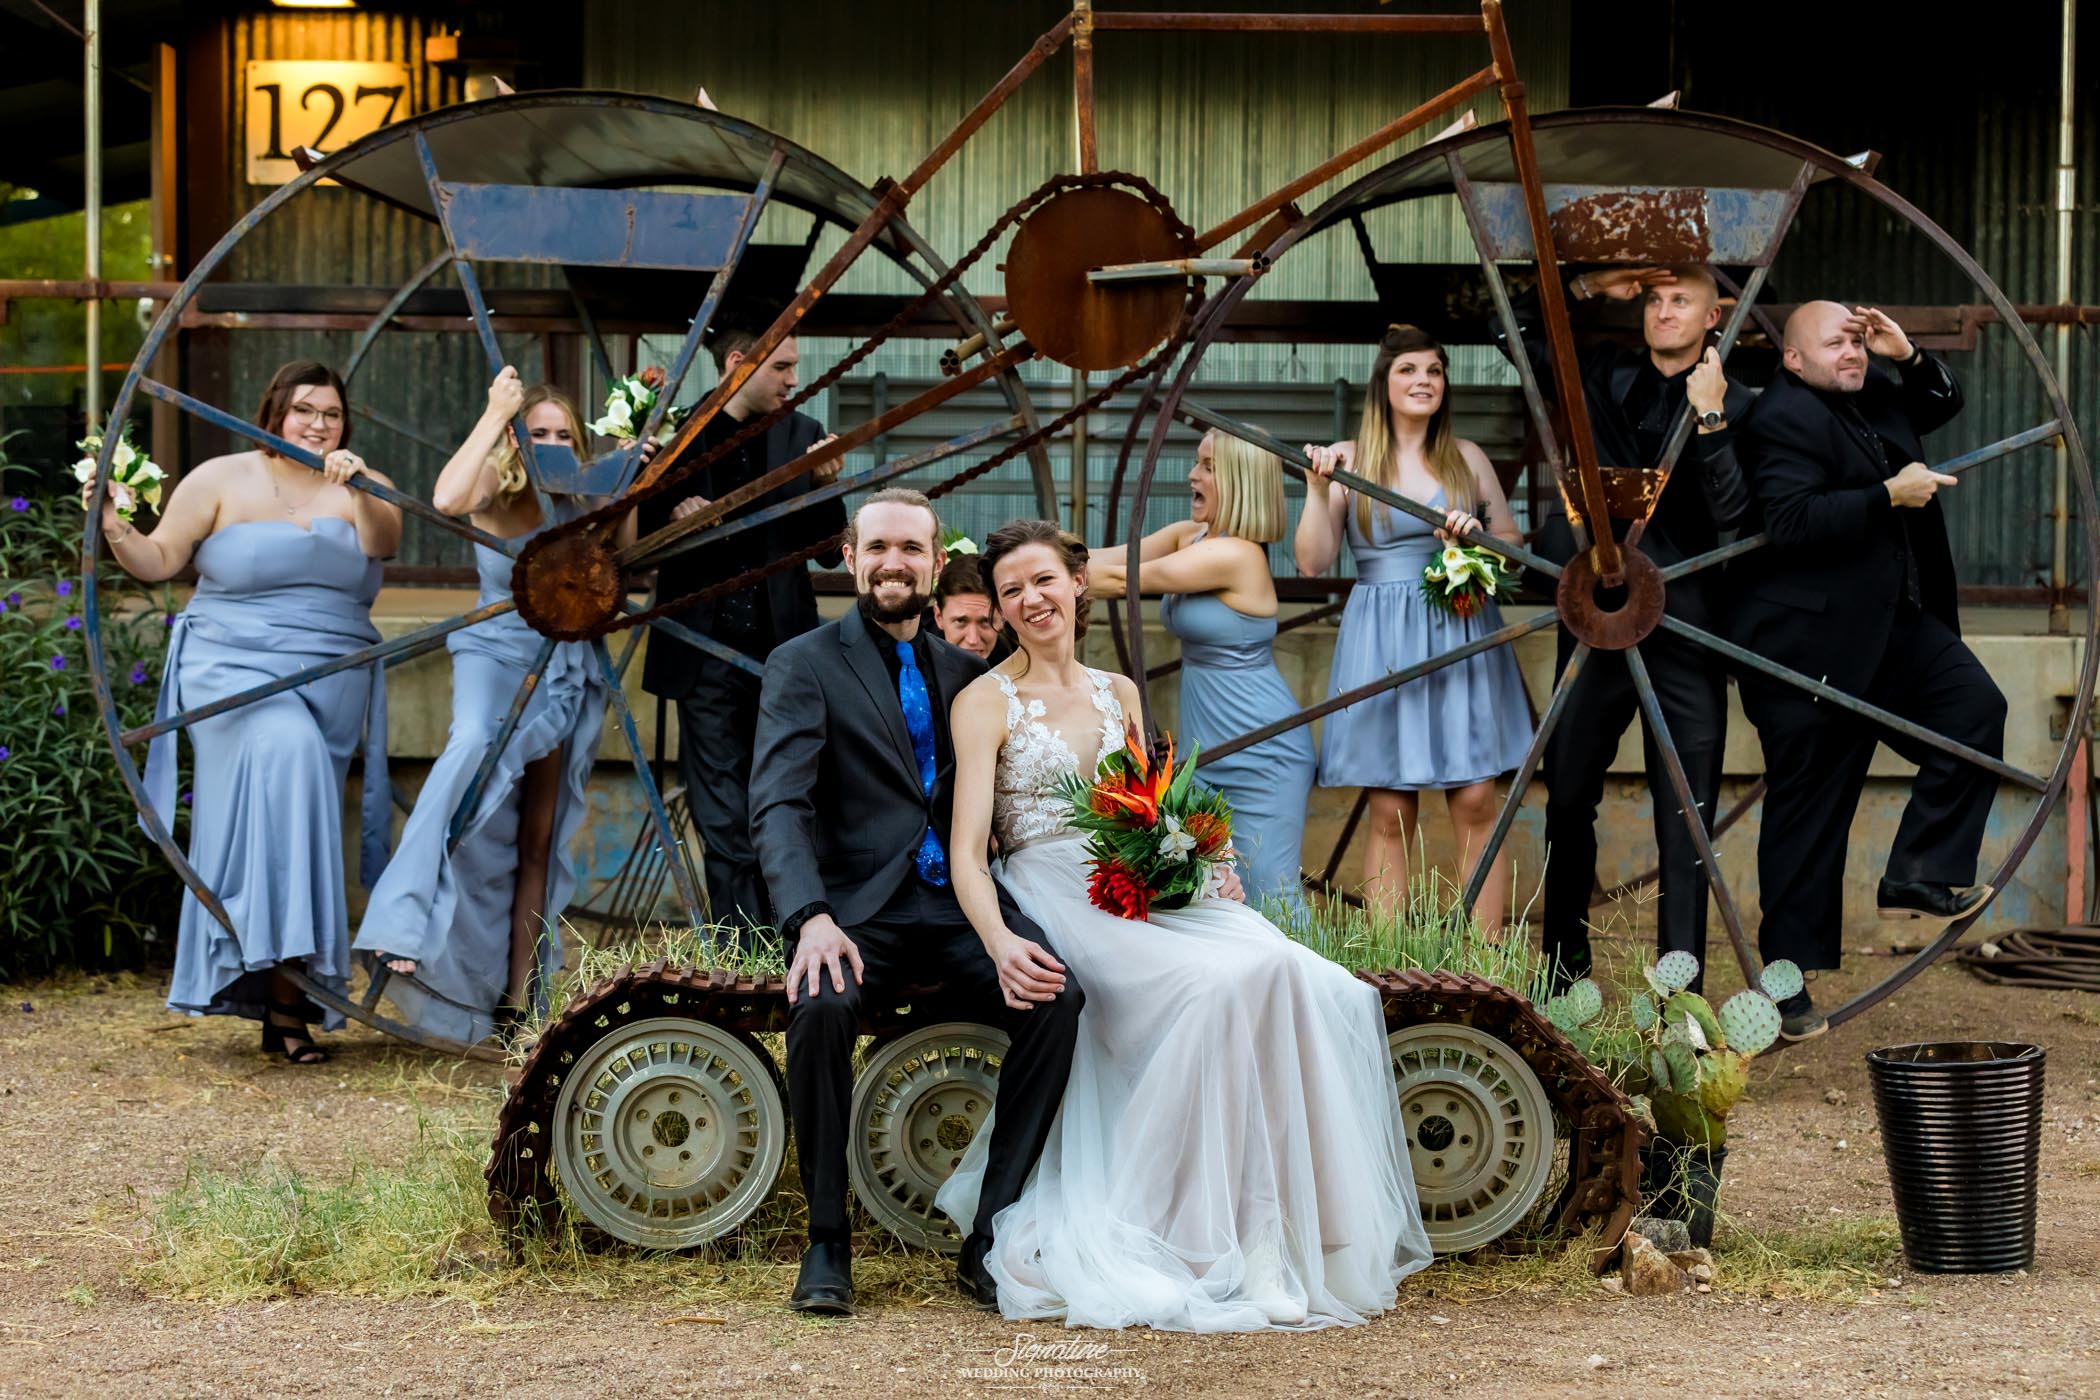 Bride, groom, and wedding party with giant bike statue